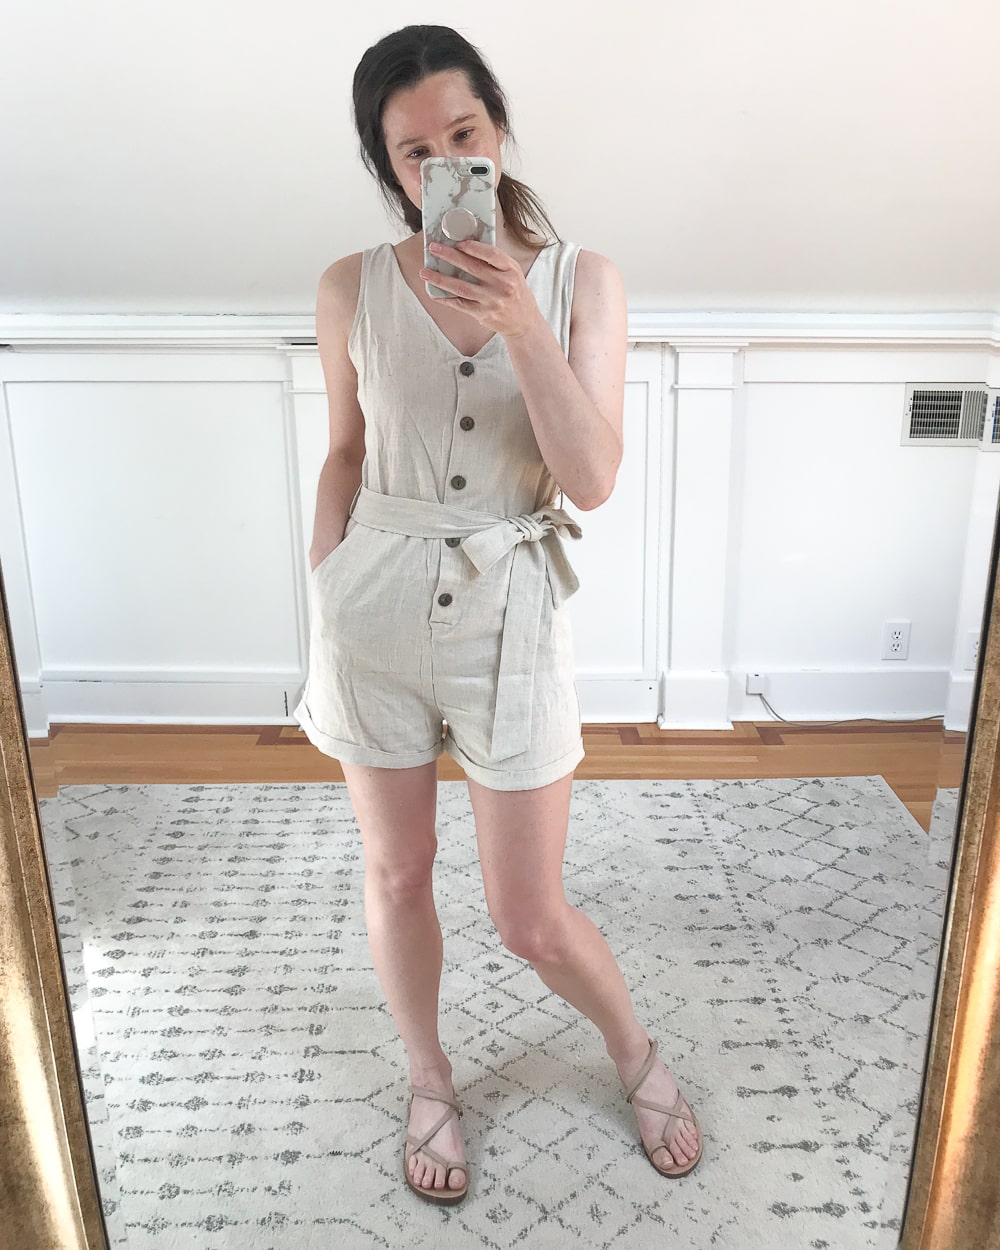 Affordable fashion blogger Stephanie Ziajka tries on a v-neck button down romper as part of her June Amazon Fashion Haul for 2021 on Diary of a Debutante